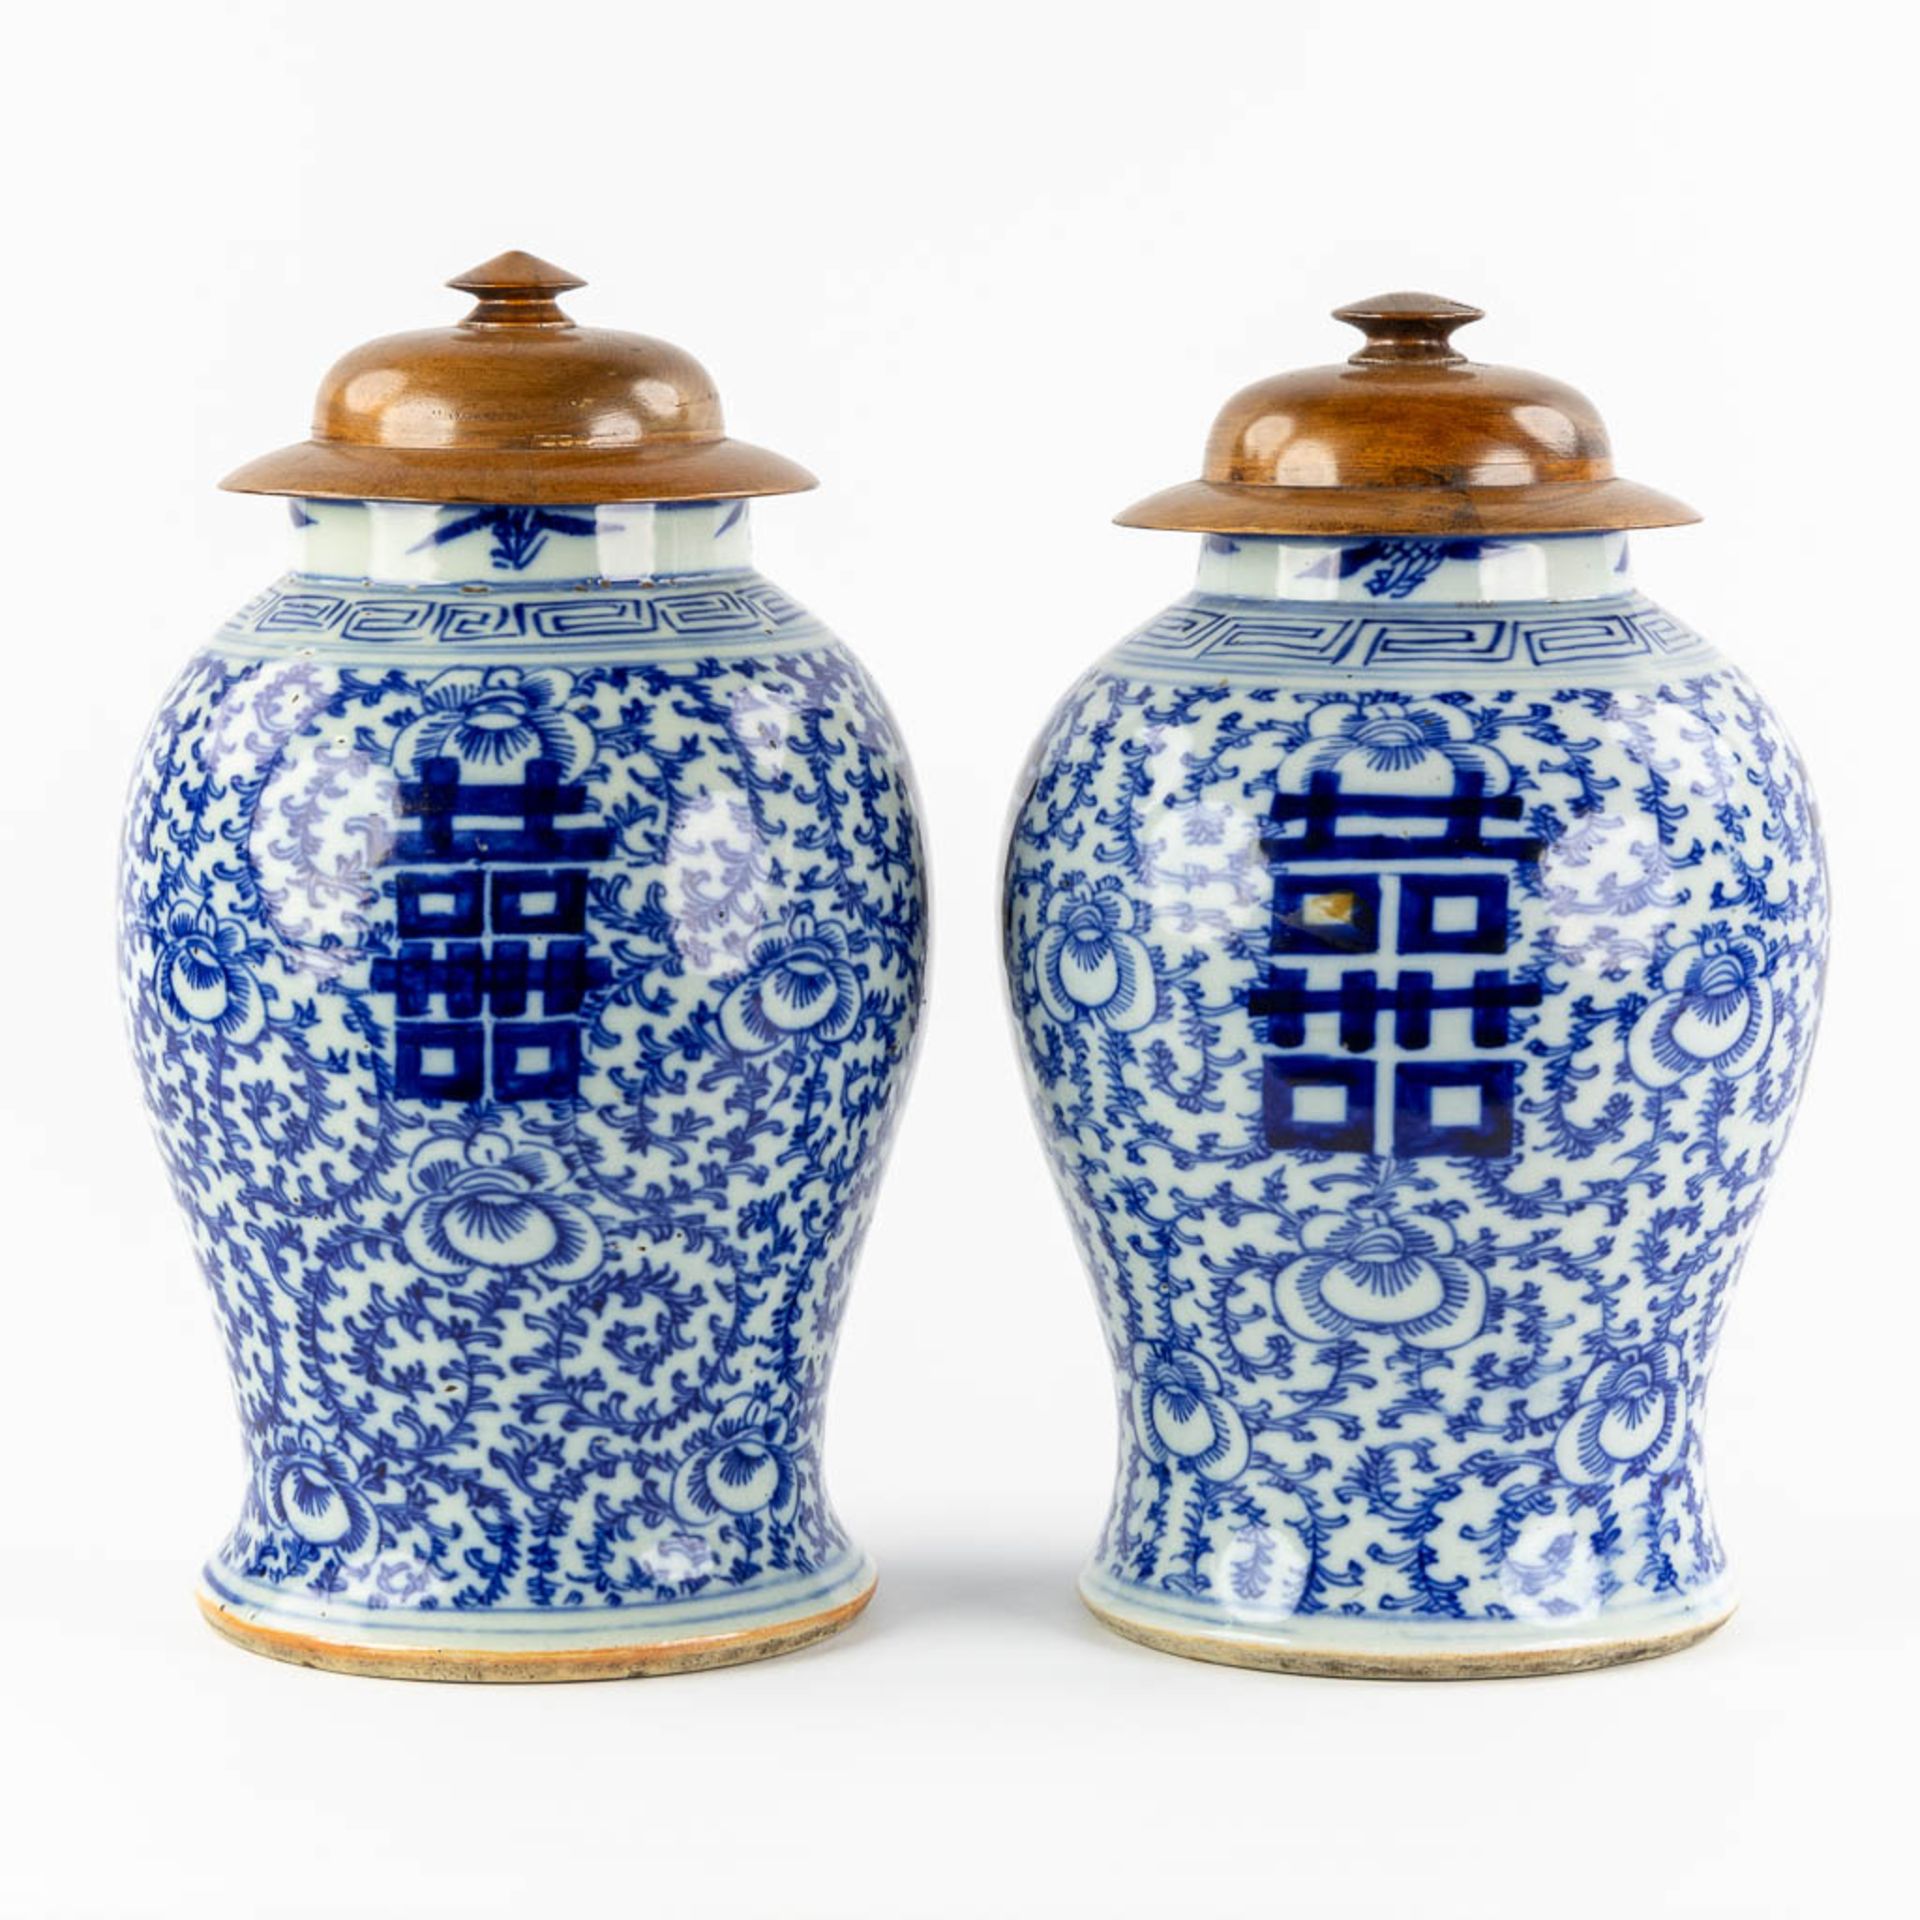 A pair of Chinese vases with a blue-white decor and a Double Xi-sign. 19th/20th C. (H:41 x D:26 cm) - Image 4 of 8